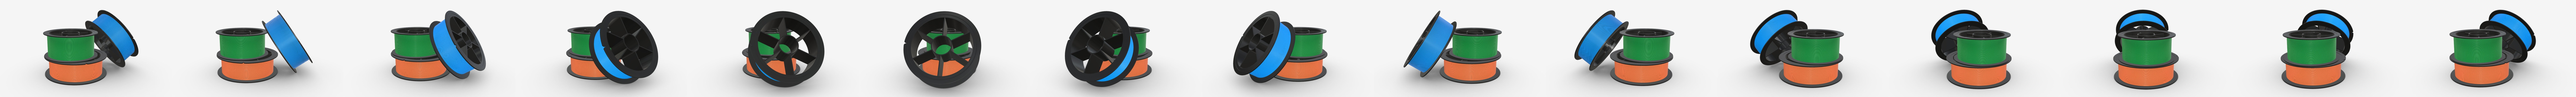 Fishing line with spool - Buy Royalty Free 3D model by HQ3DMOD  (@AivisAstics) [c518428]